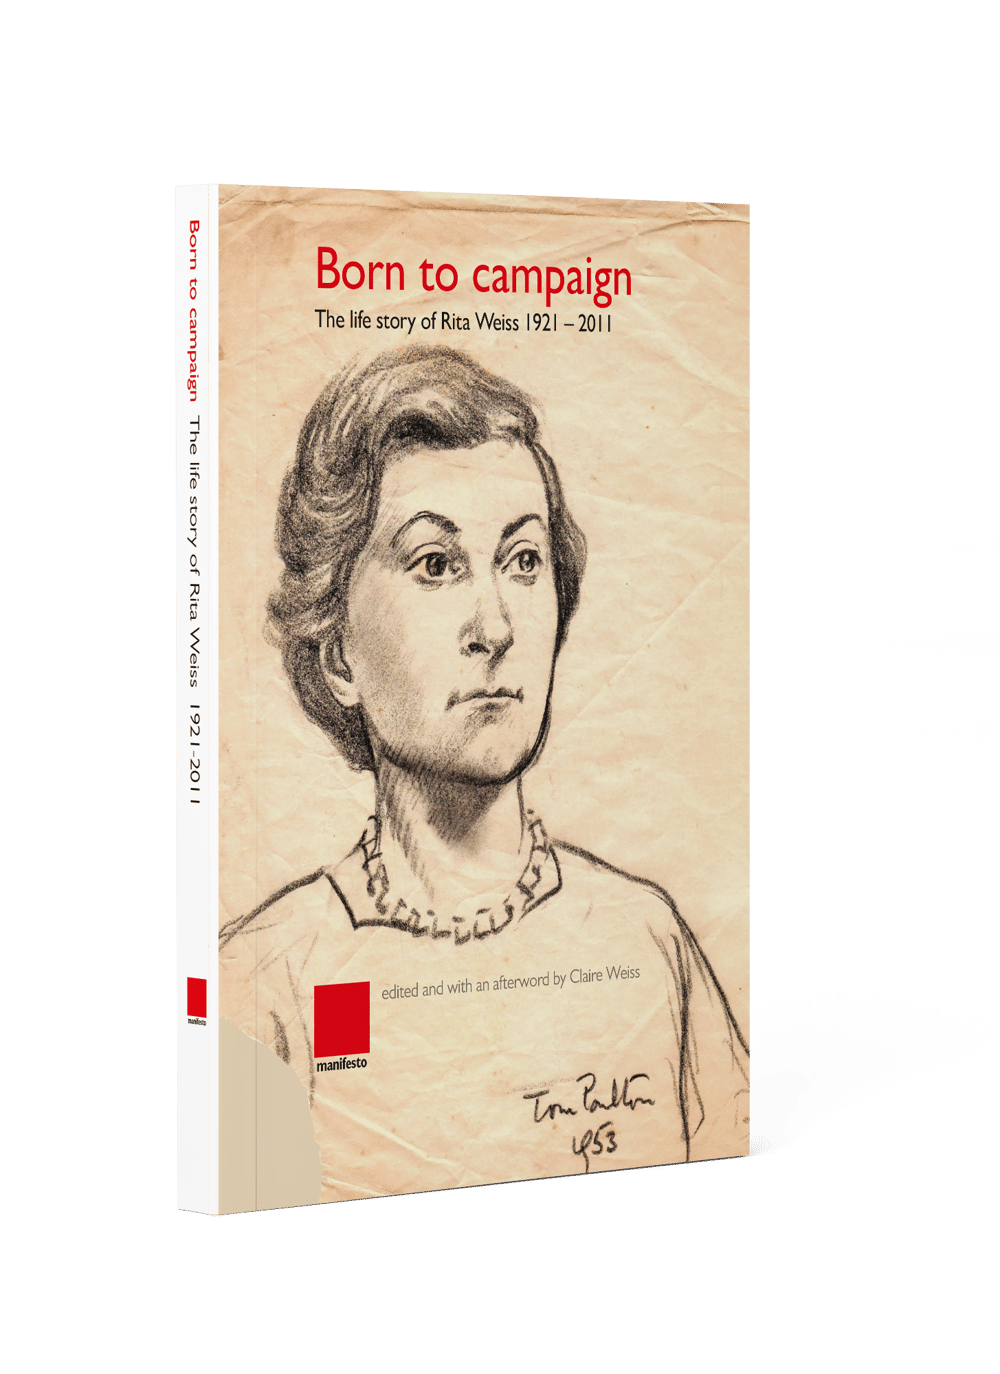 Born to Campaign: The life story of Rita Weiss 1921-2011